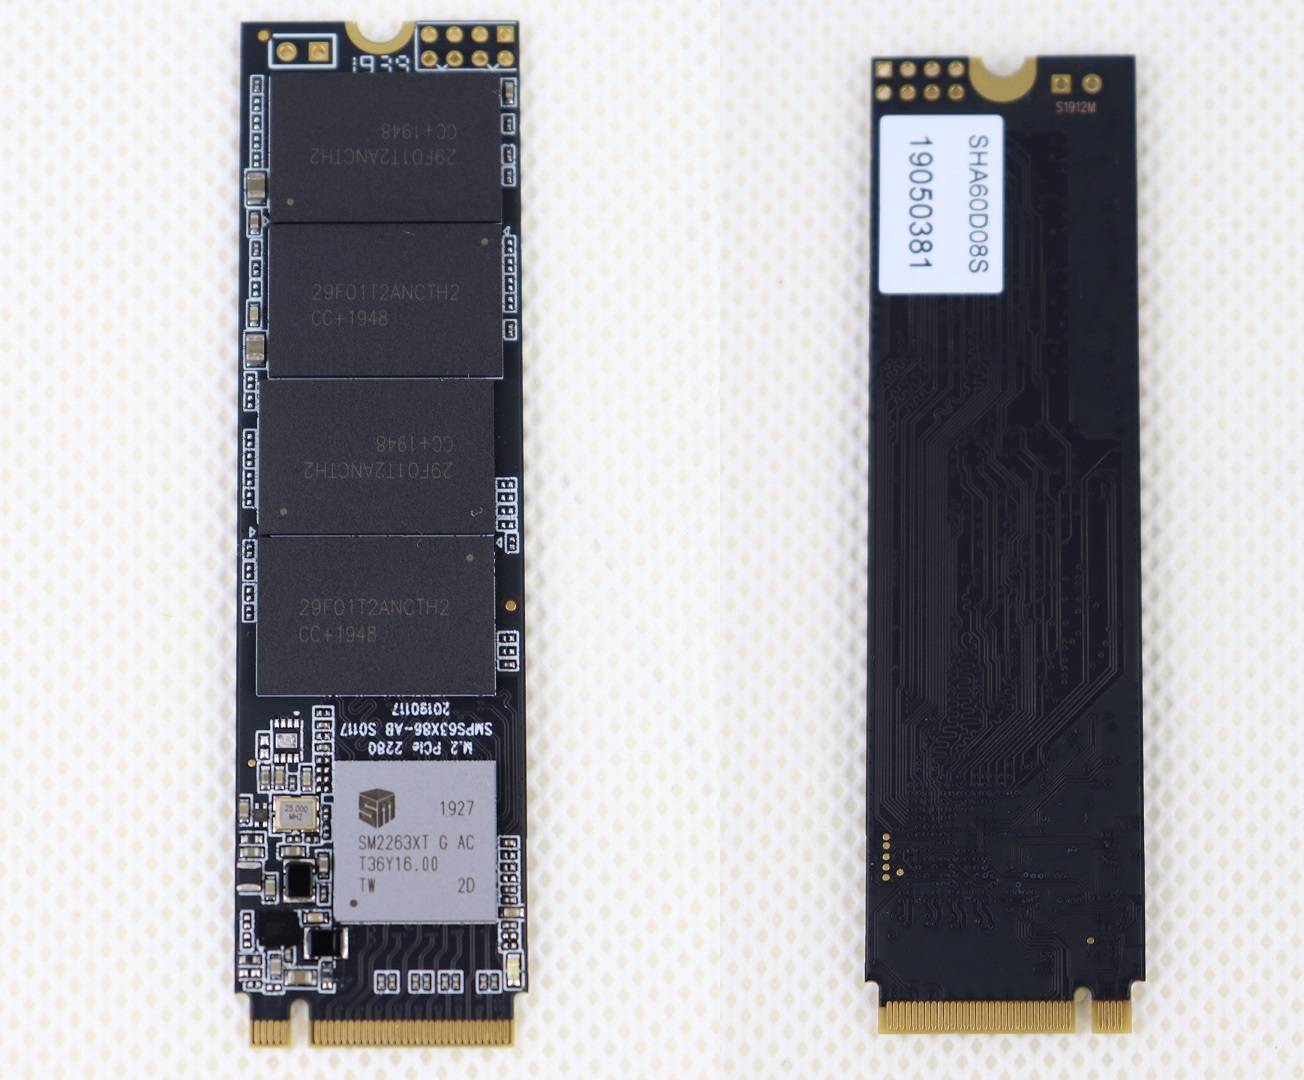 Silicon Power P34A60 PCIe NVMe SSD